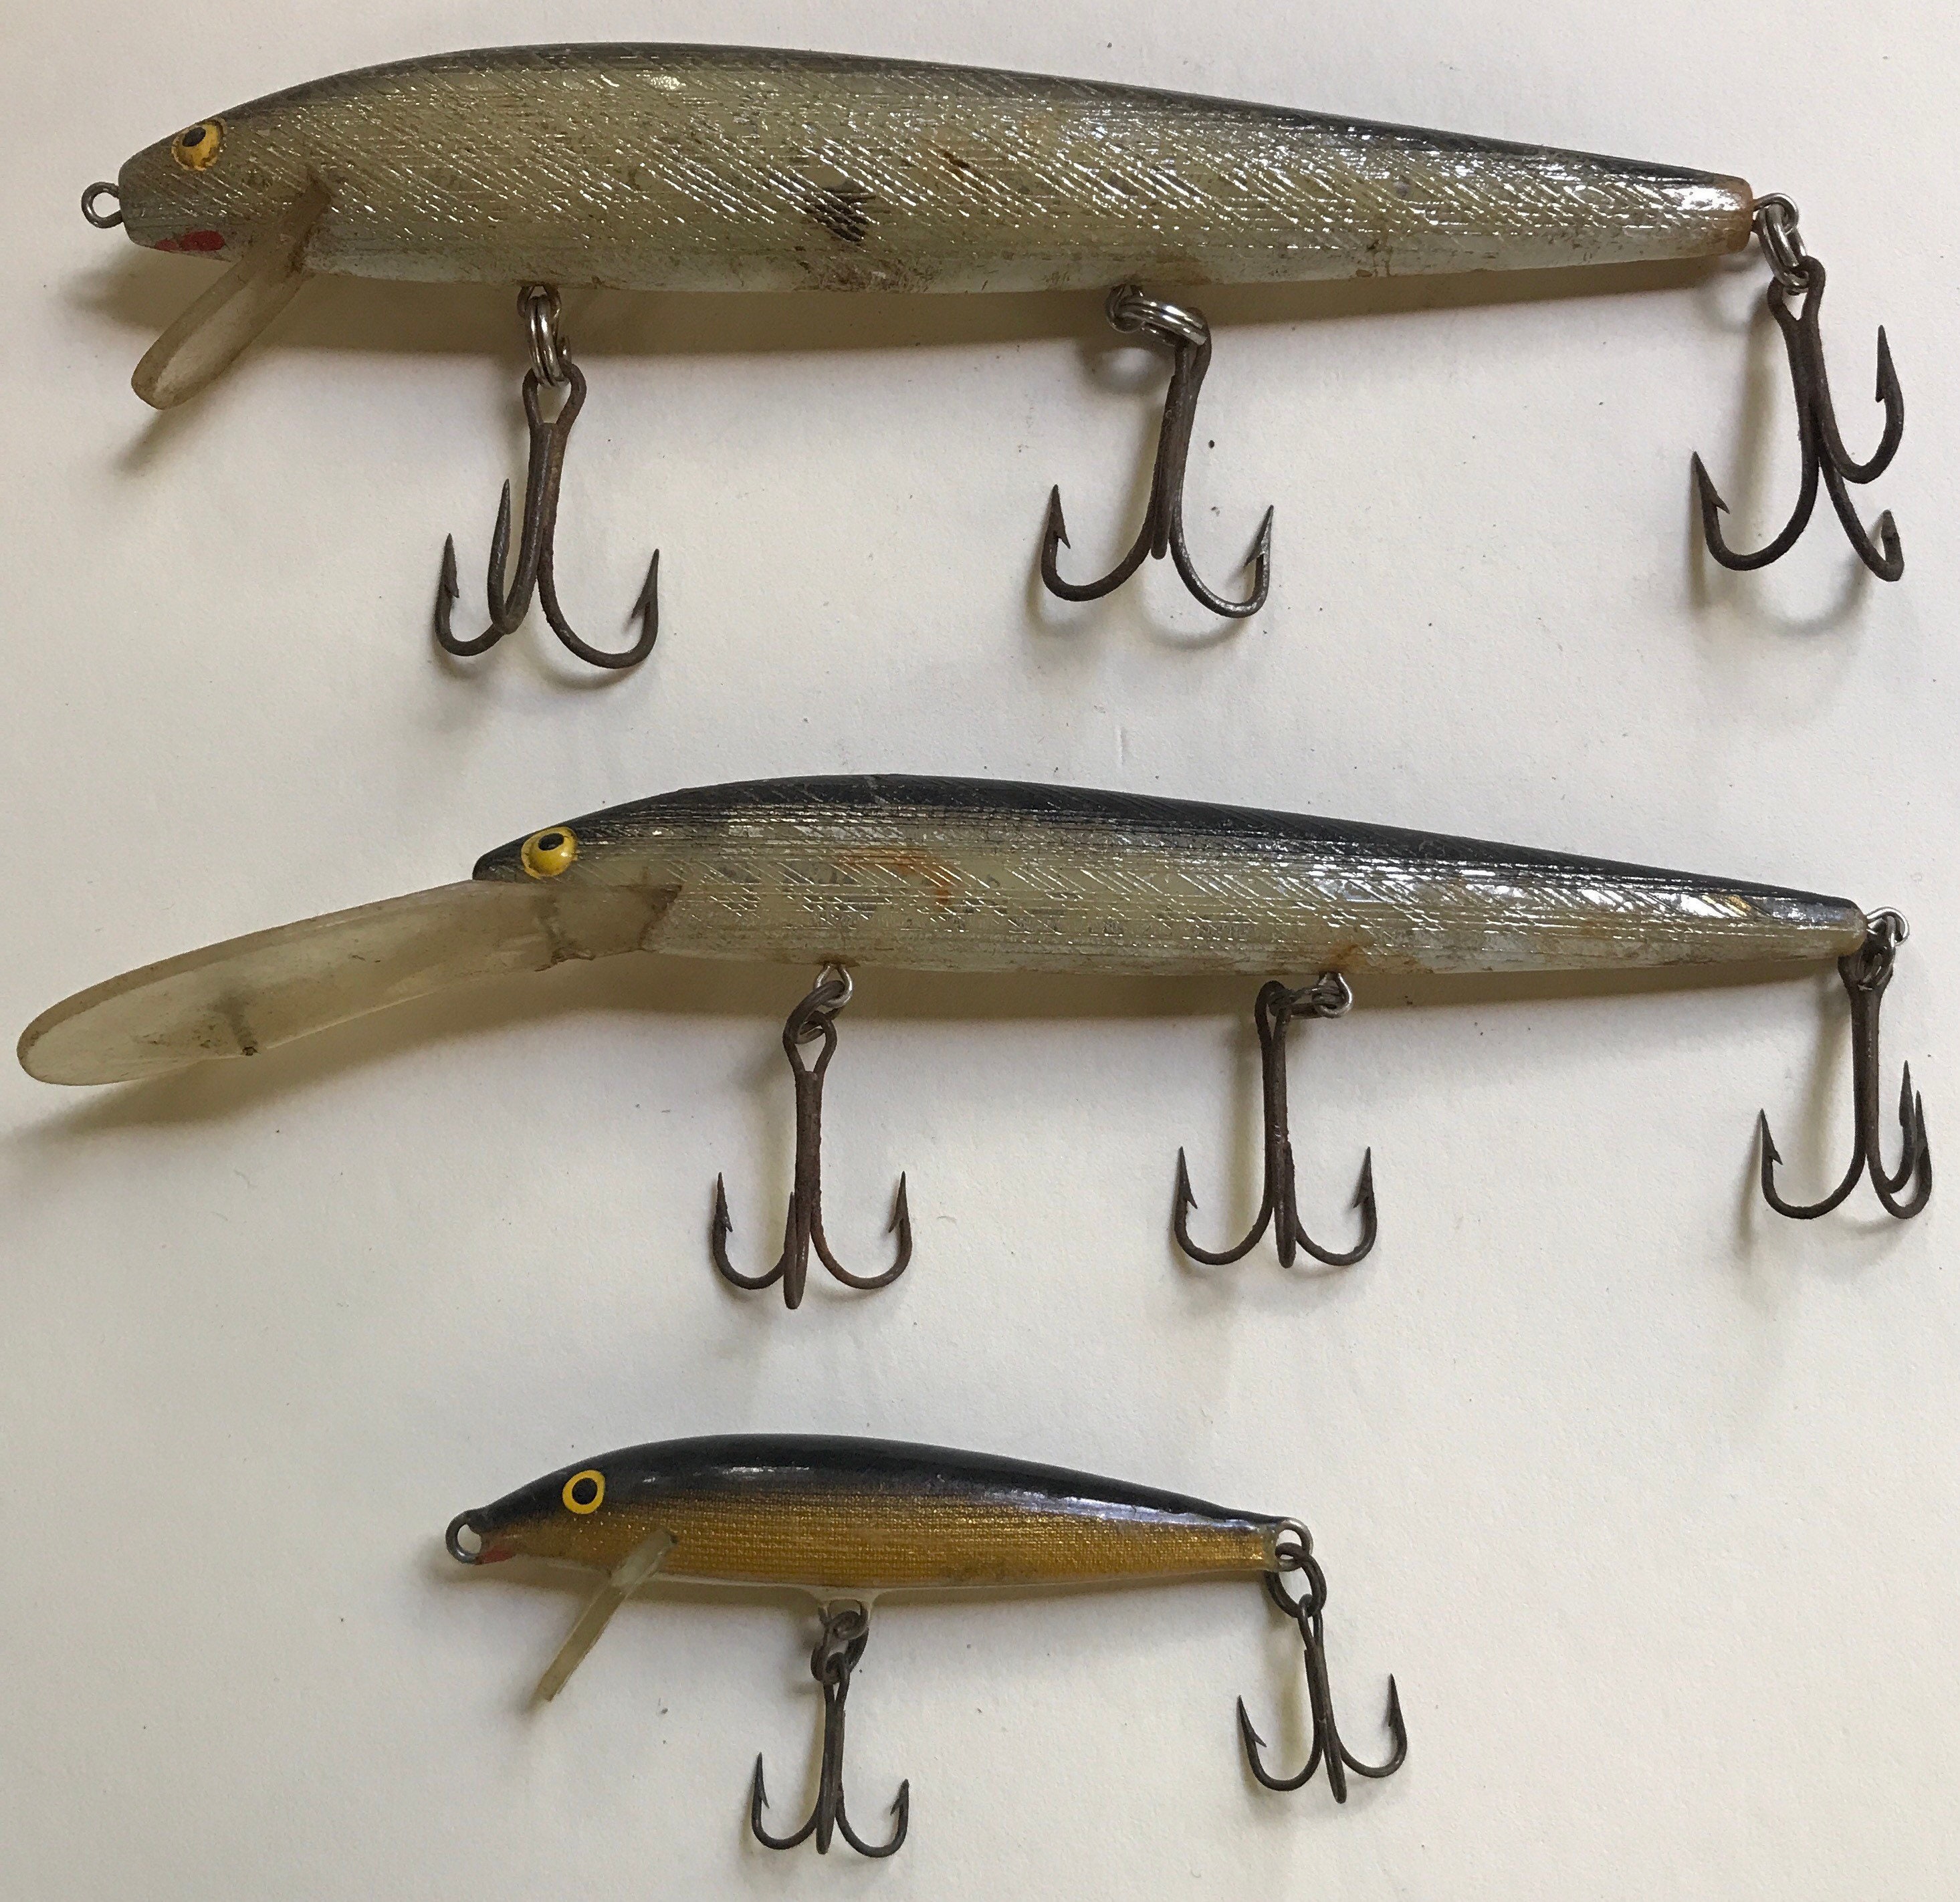 Canadian Sportfishing - Changing trebles to single hooks on Rapala Minnow  Lures & crankbaits.  -to-single-hooks-on-rapala-minnow-lures/ Rapala minnow lures have been  around since the 60's and they